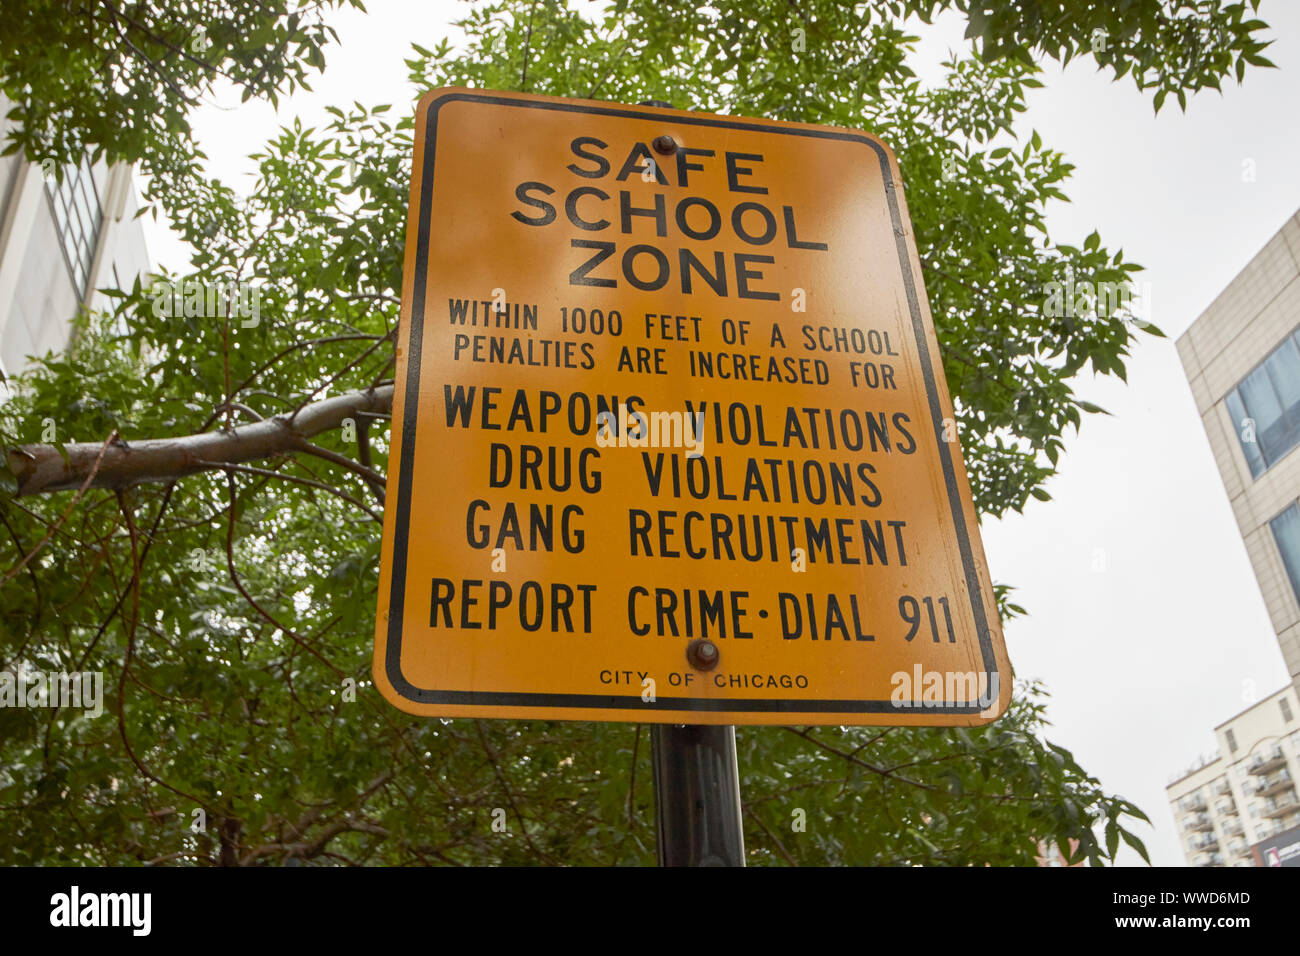 safe school zone sign warning of increased penalties for certain crimes in a school area Chicago Illinois USA Stock Photo